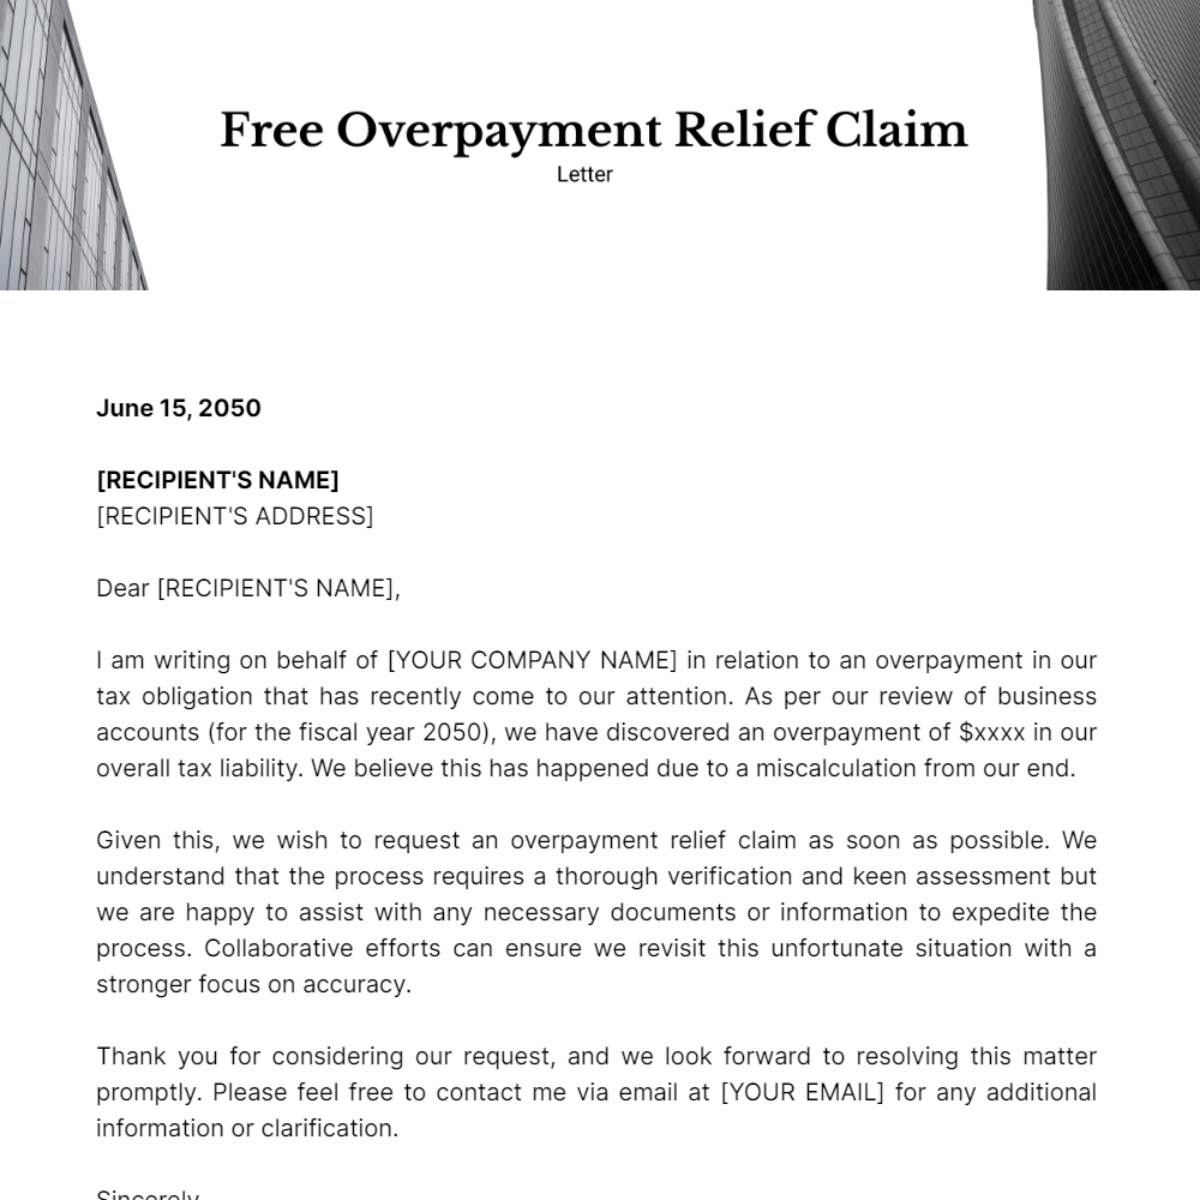 Overpayment Relief Claim Letter Template